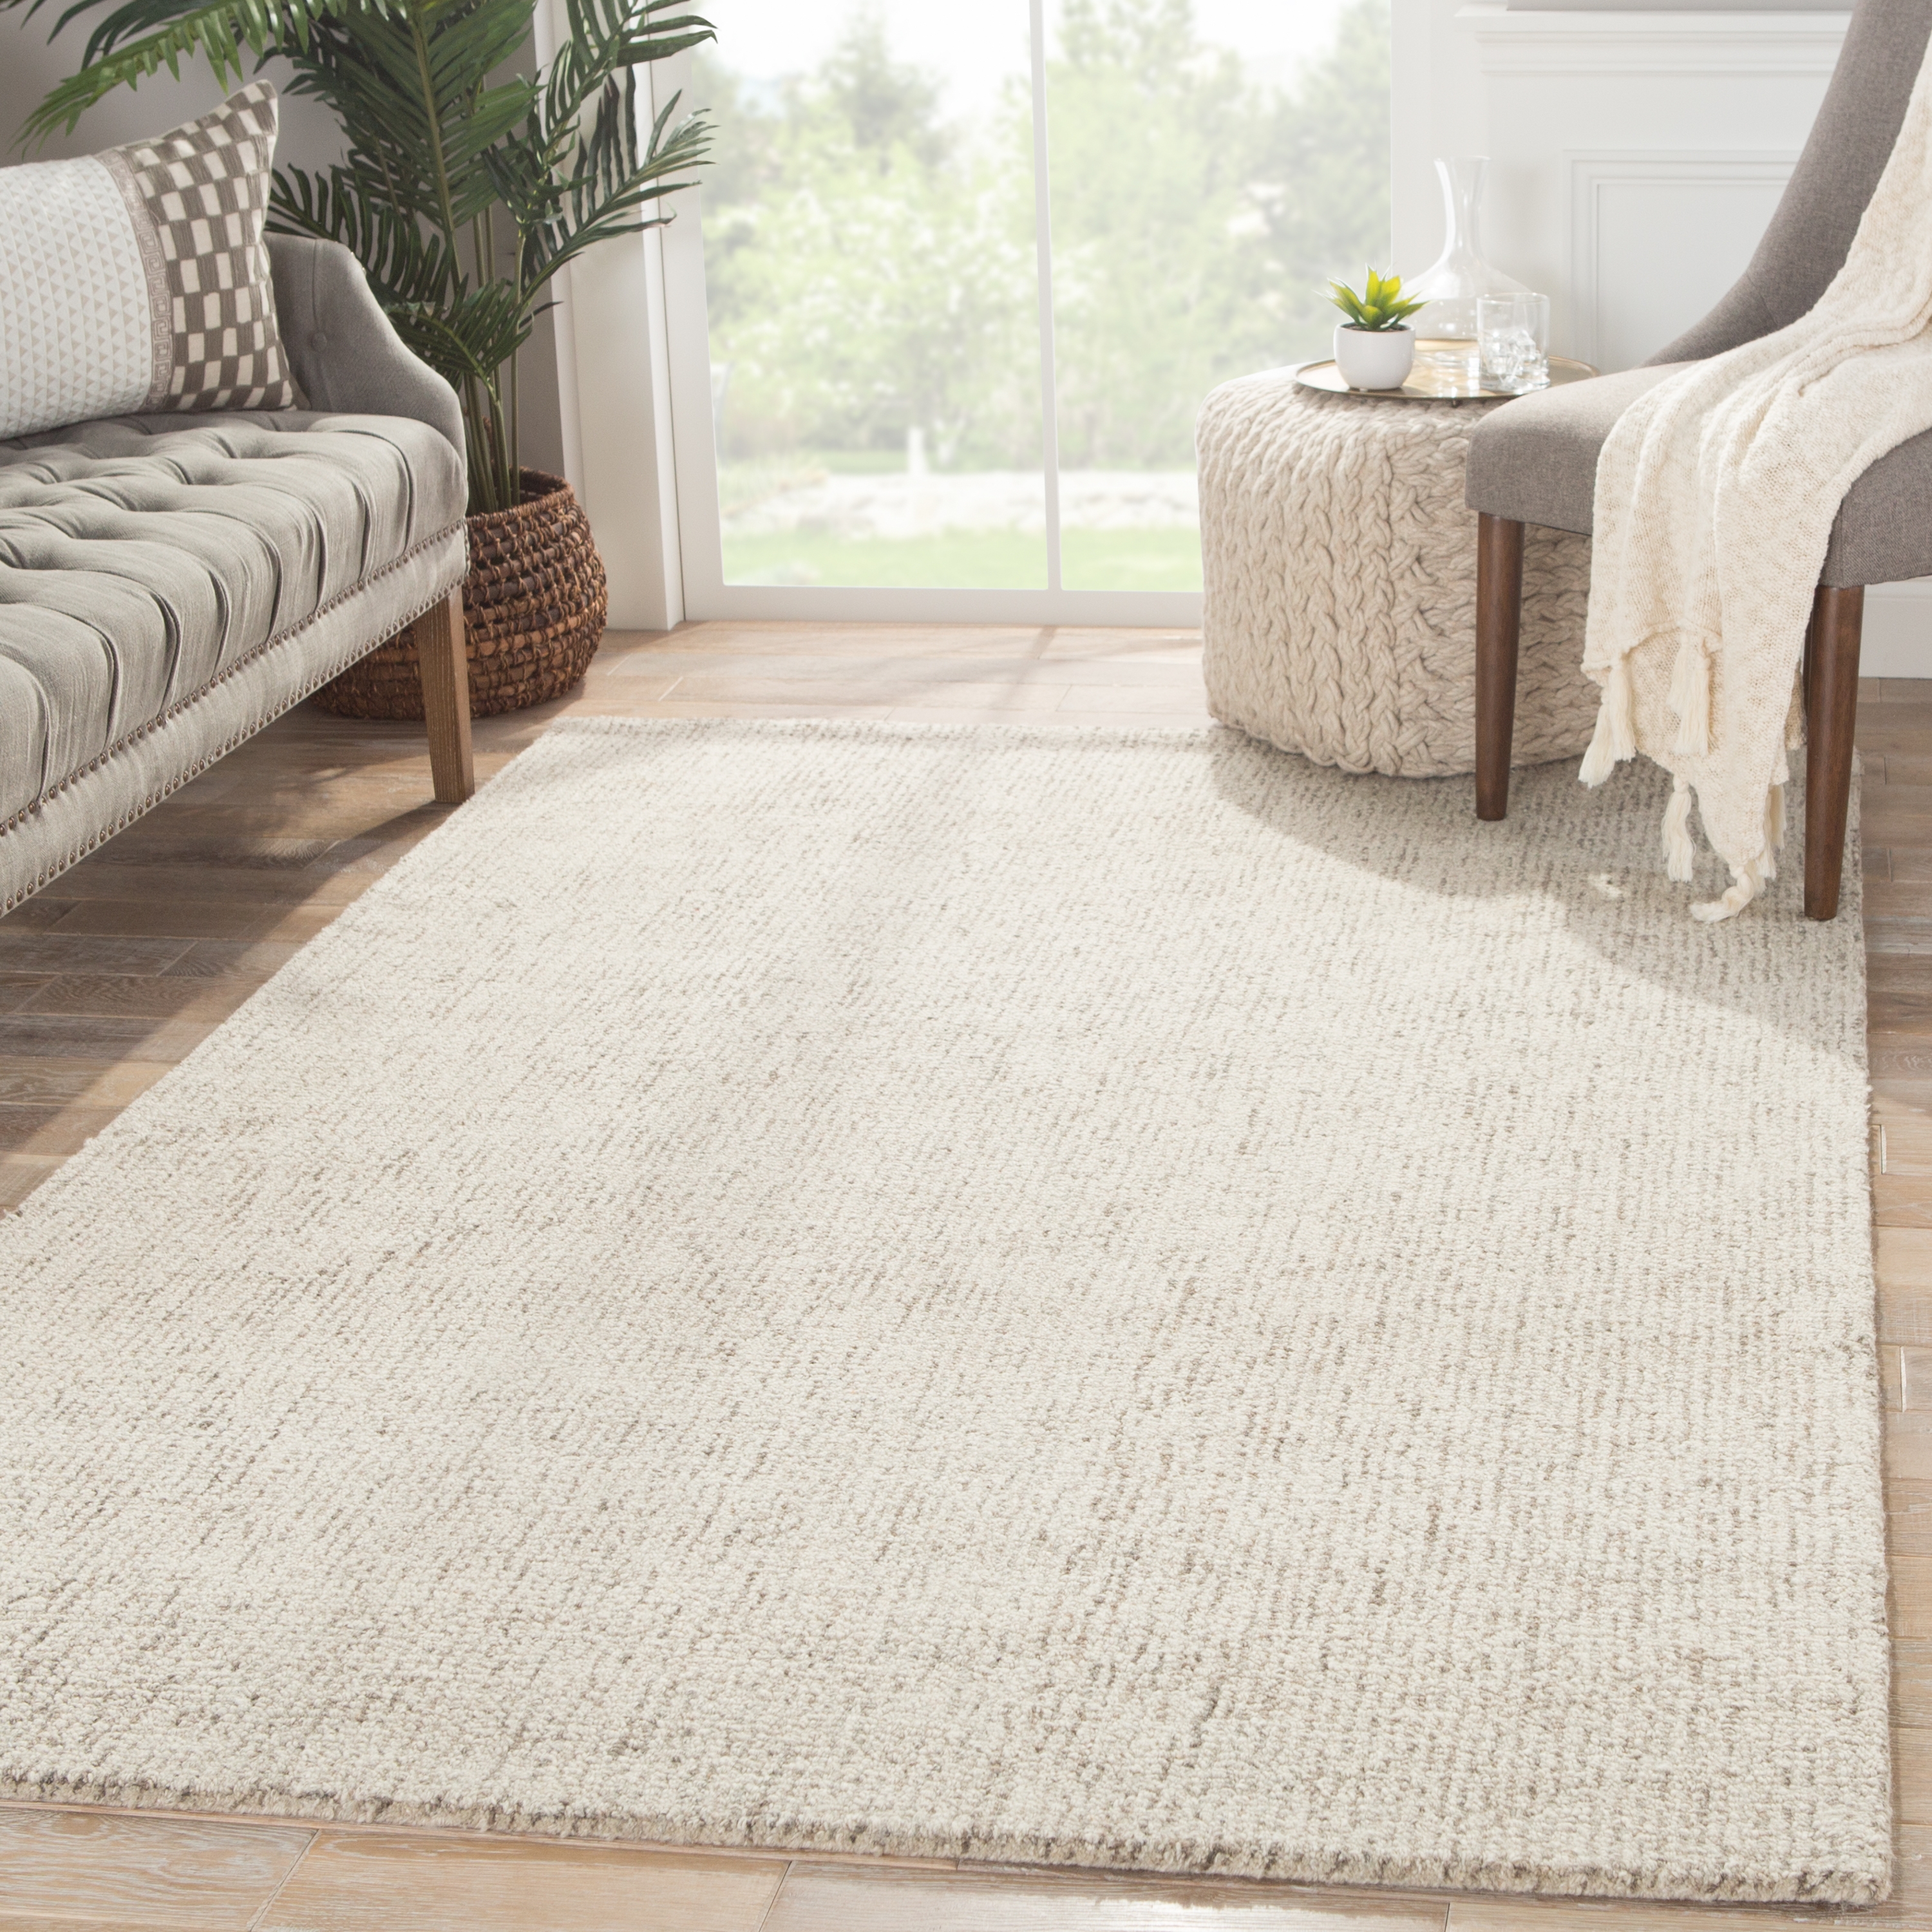 Oland Handmade Solid White/ Brown Area Rug (2' X 3') - Image 4